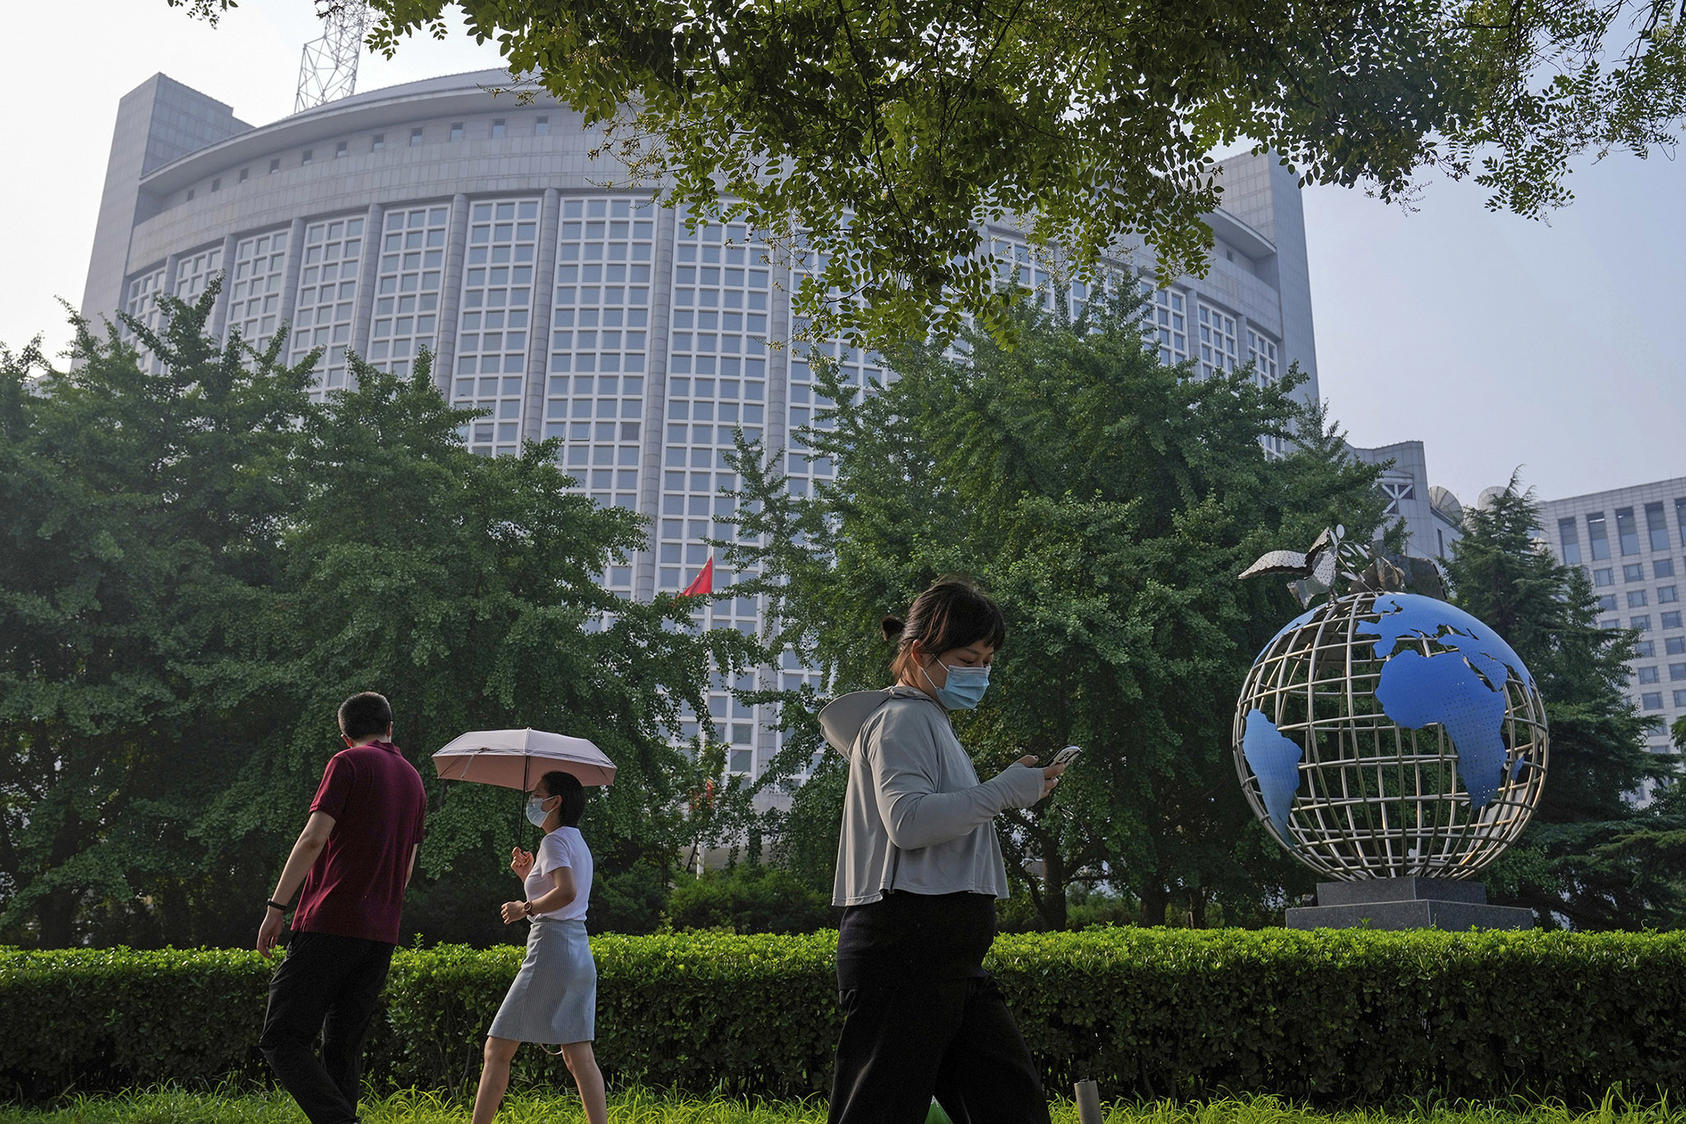 A globe sculpture is displayed outside the Ministry of Foreign Affairs office in Beijing on August 3, 2022. For a decade or more, the People’s Republic of China has shown a growing interest in playing a larger role in preventing and mitigating regional conflict and instability. (Photo by Andy Wong/AP)